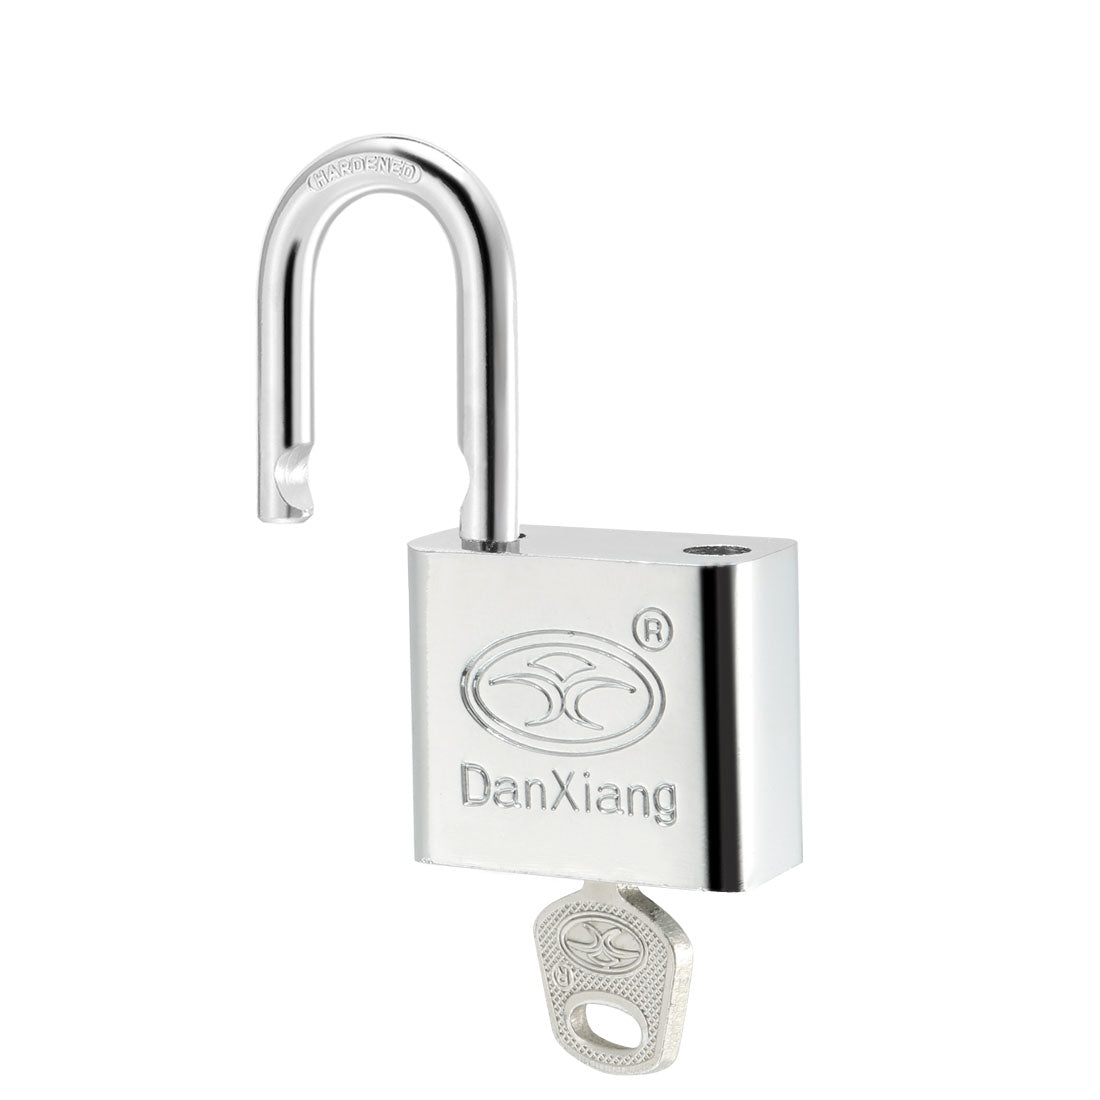 uxcell Uxcell 30mm Body Wide Stainless Steel Padlock Chrome Plated Harden Shackle, Keyed Alike